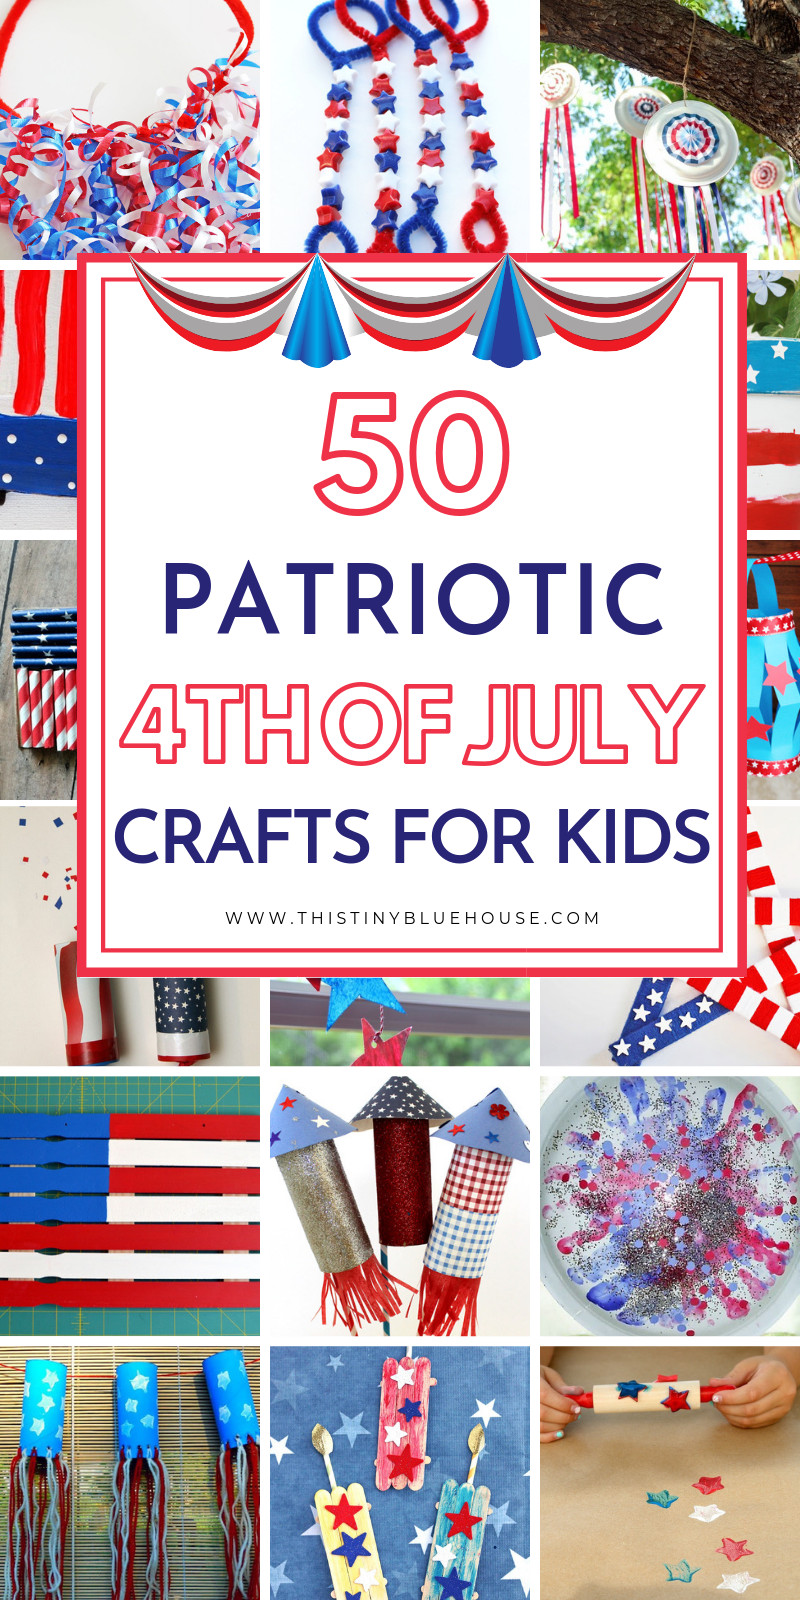 4Th Of July Food Crafts For Kids
 This Tiny Blue House food family & fun